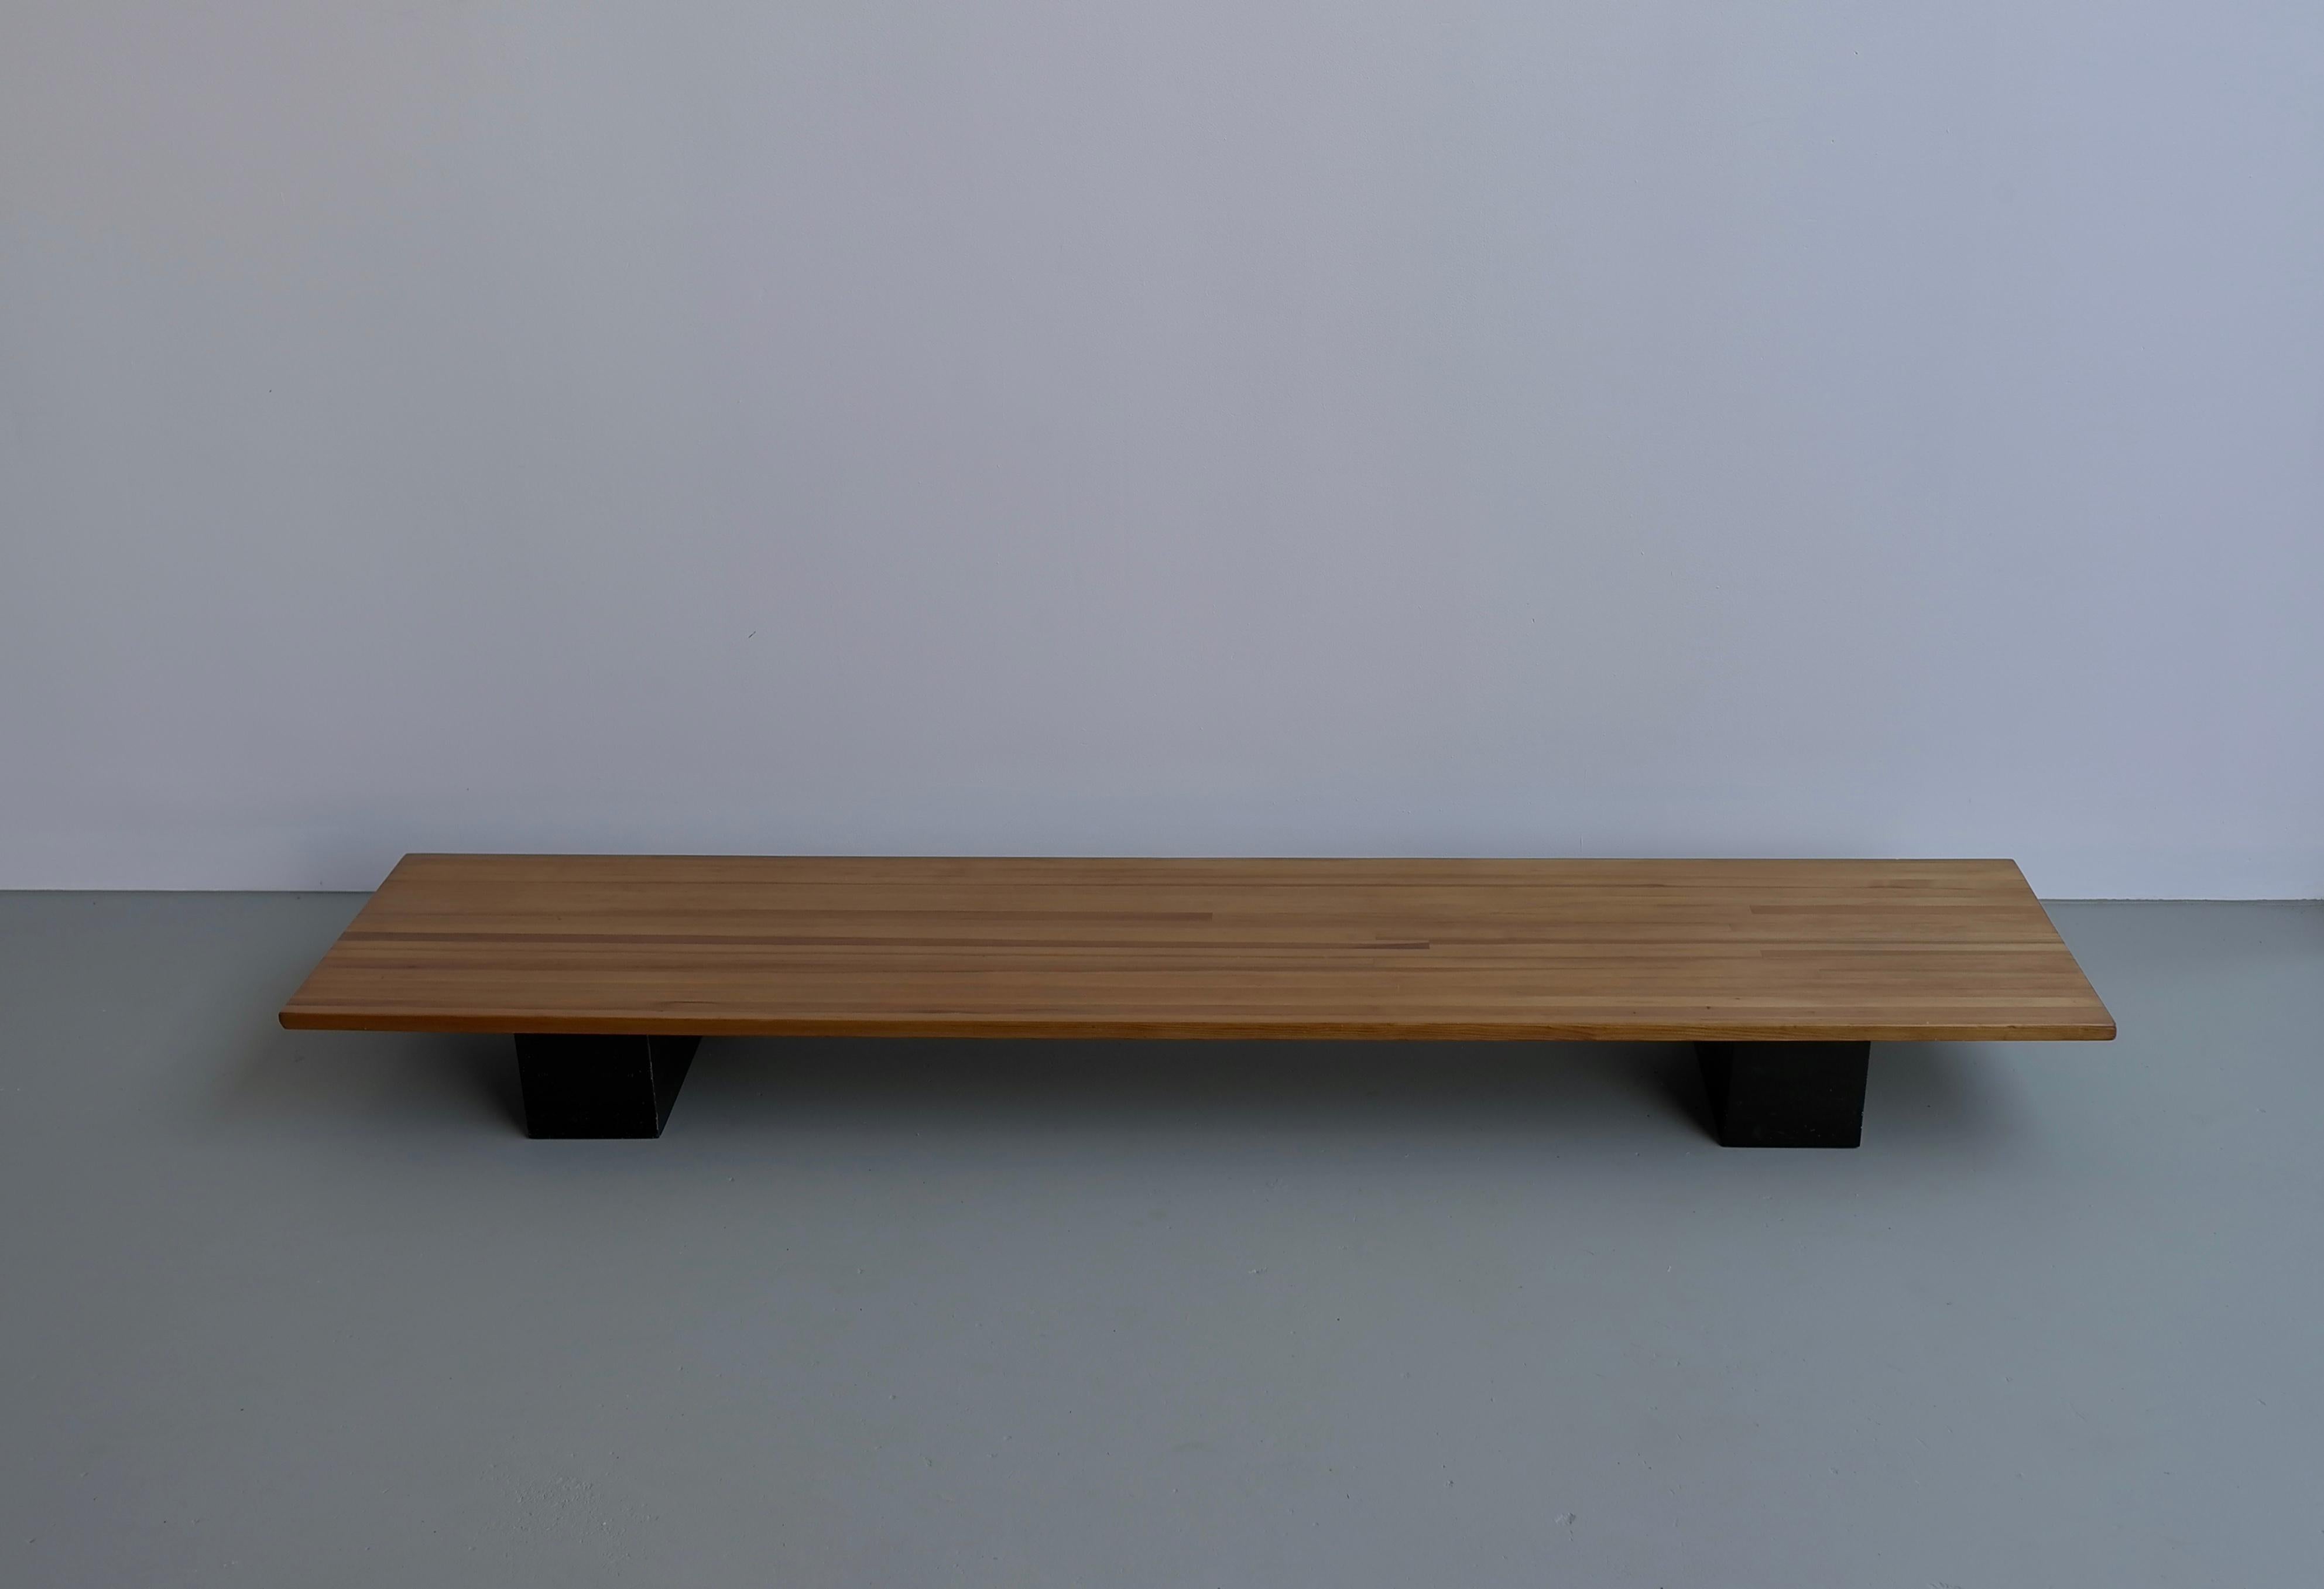 Large Low Pine Coffee Table by Ilmari Tapiovaara for Laukaan Pu, Finland, 1950s For Sale 2